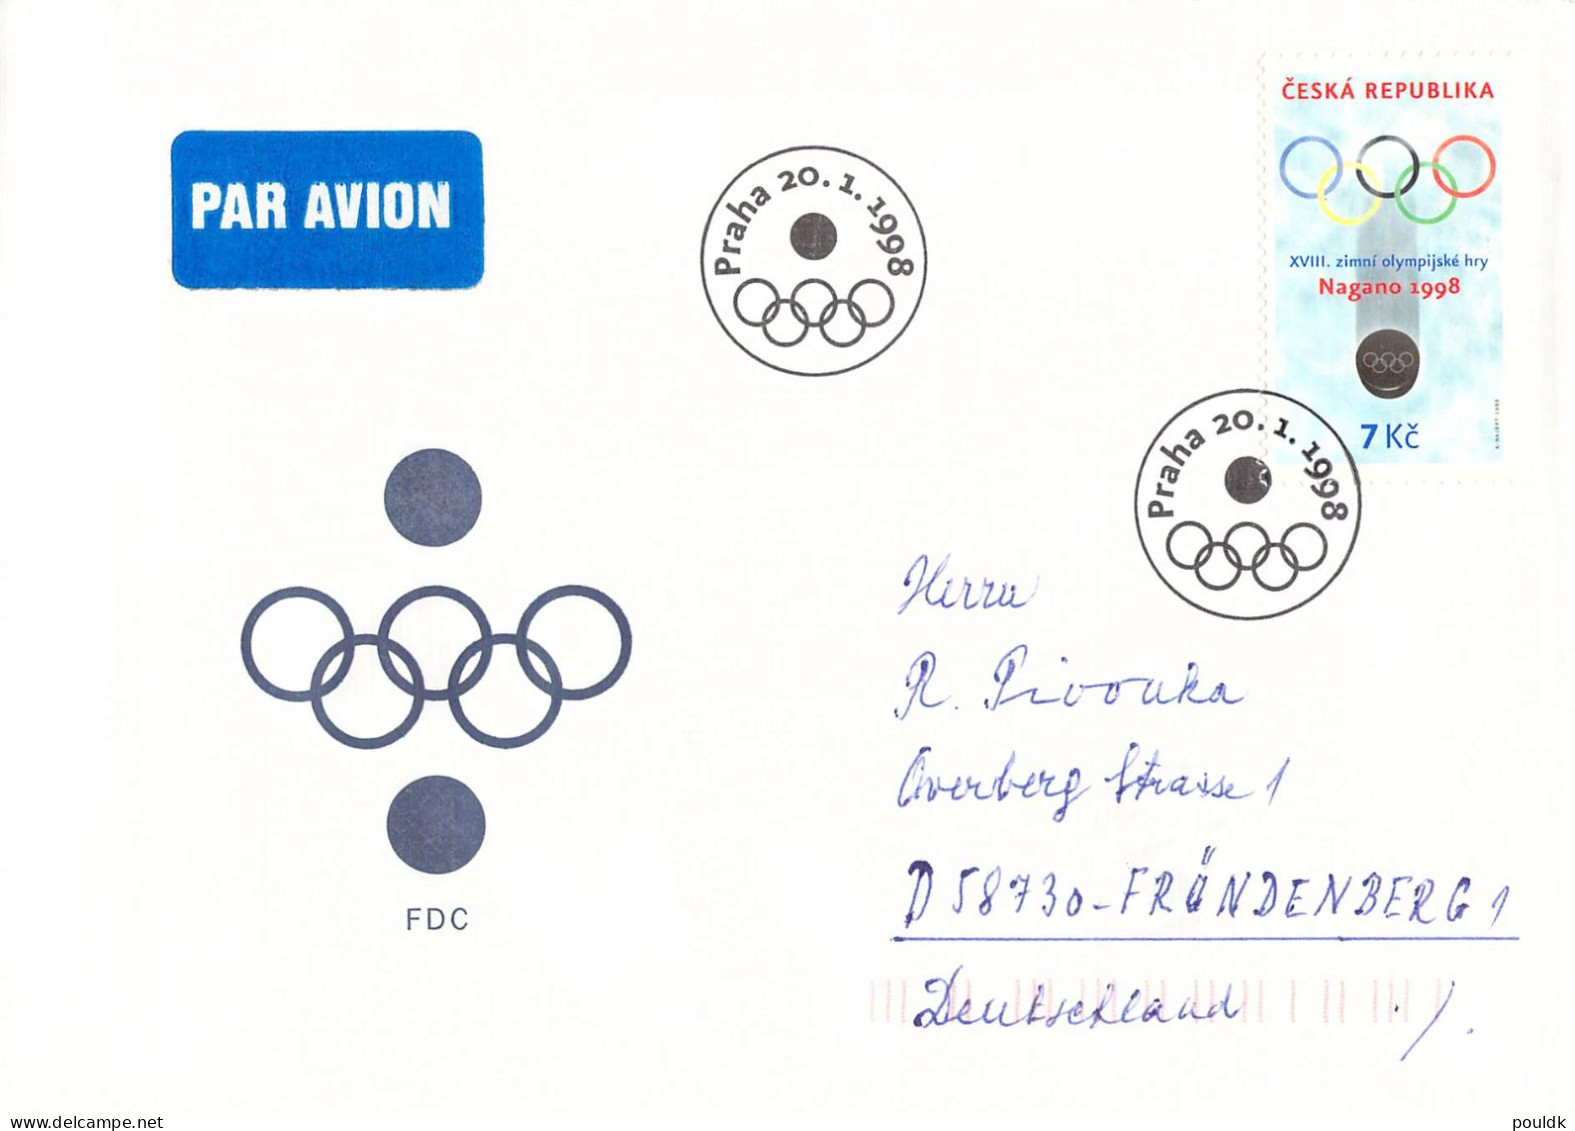 Olympic Games in Nagano 1998. 10 cards/covers. Postal weight approx 80 gramms. Please read Sales Conditions under Image